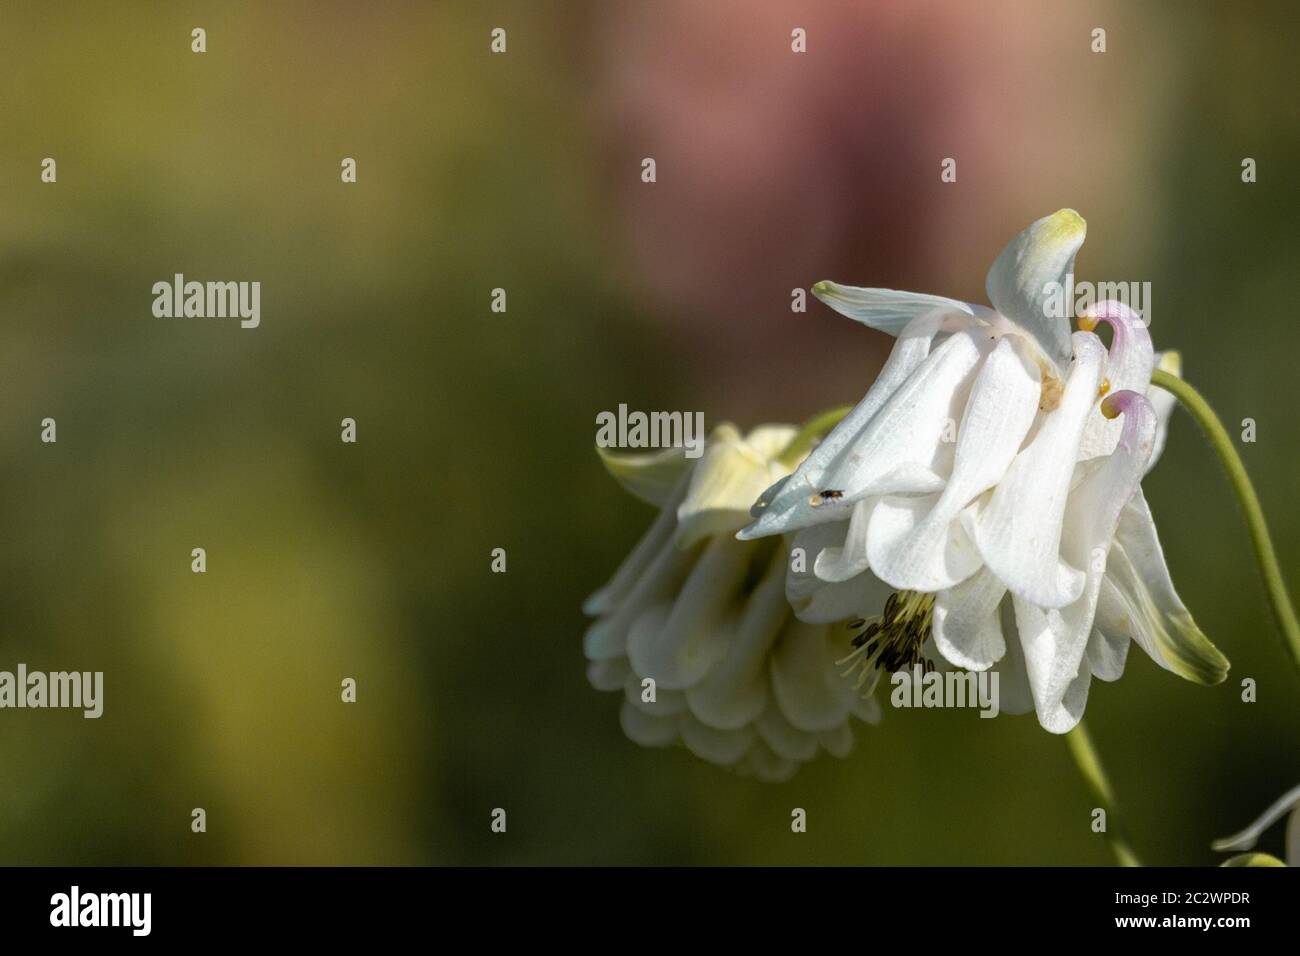 Flower of a common columbine in a german garden Stock Photo